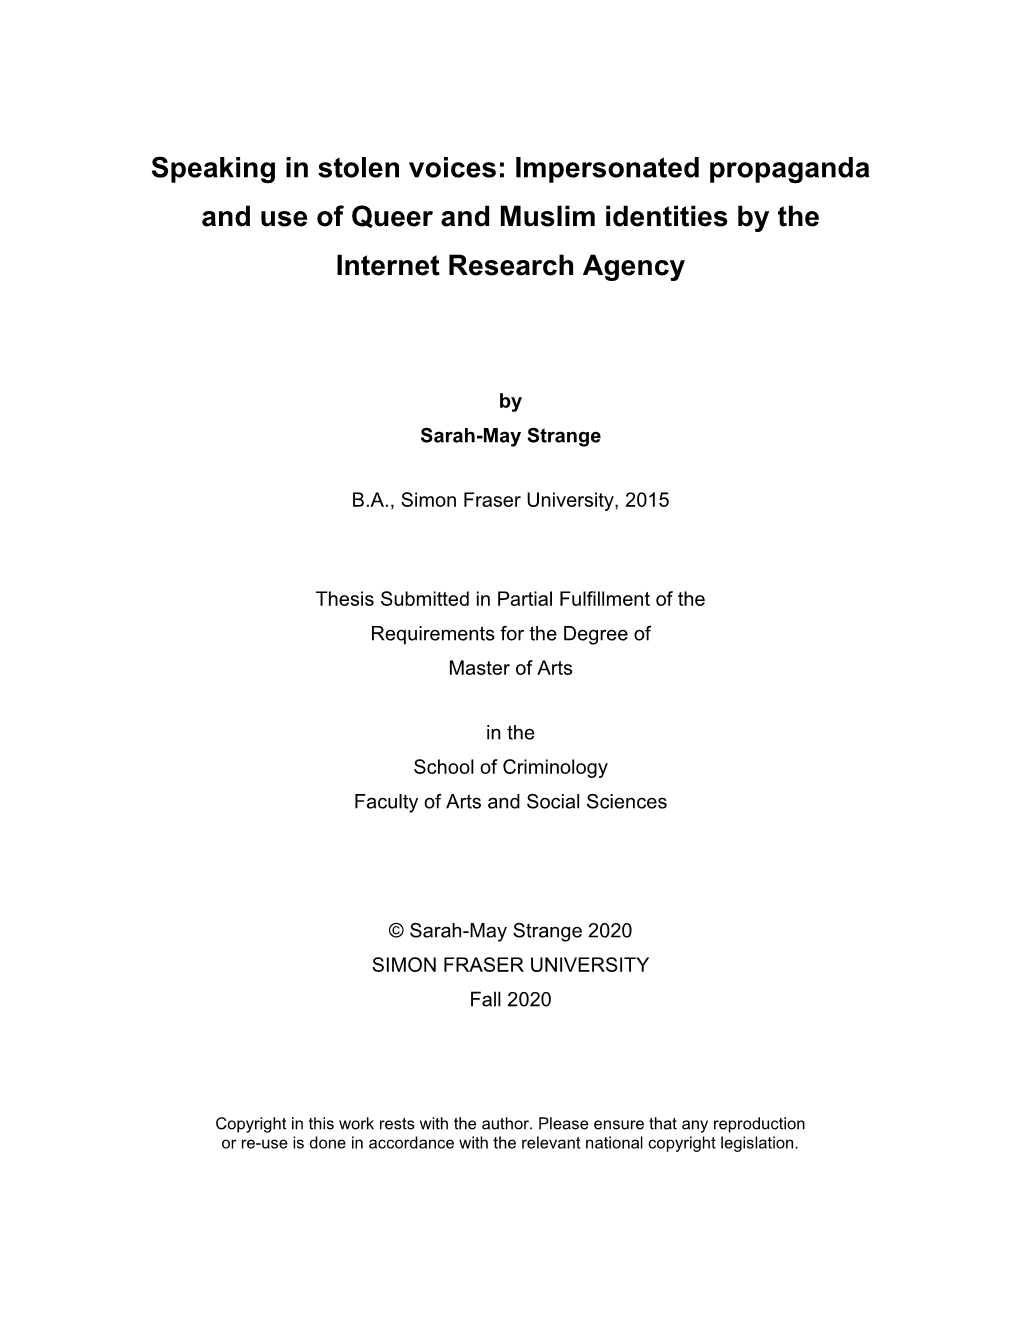 Impersonated Propaganda and Use of Queer and Muslim Identities by the Internet Research Agency